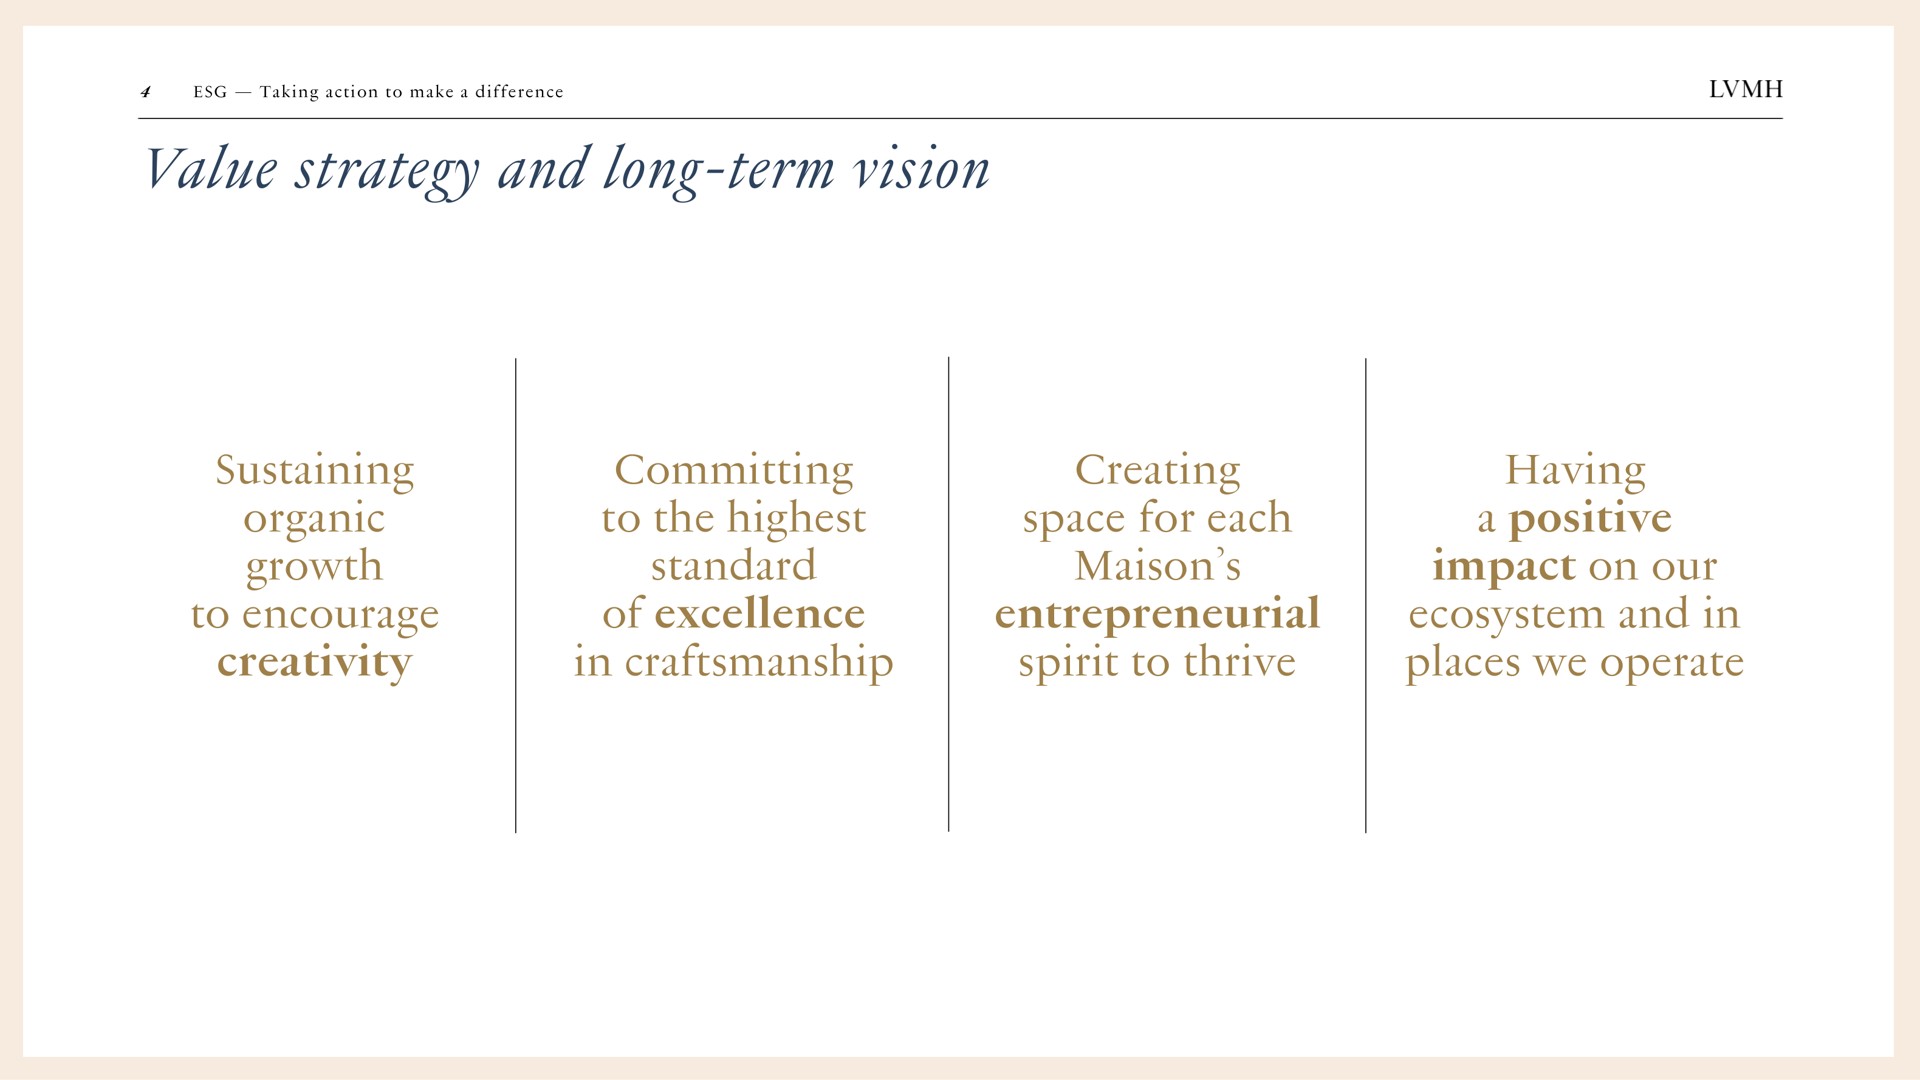 value strategy and long term vision sustaining organic growth to encourage creativity committing to the highest standard of excellence in craftsmanship creating space for each entrepreneurial spirit to thrive having a positive impact on our ecosystem and in places we operate | LVMH